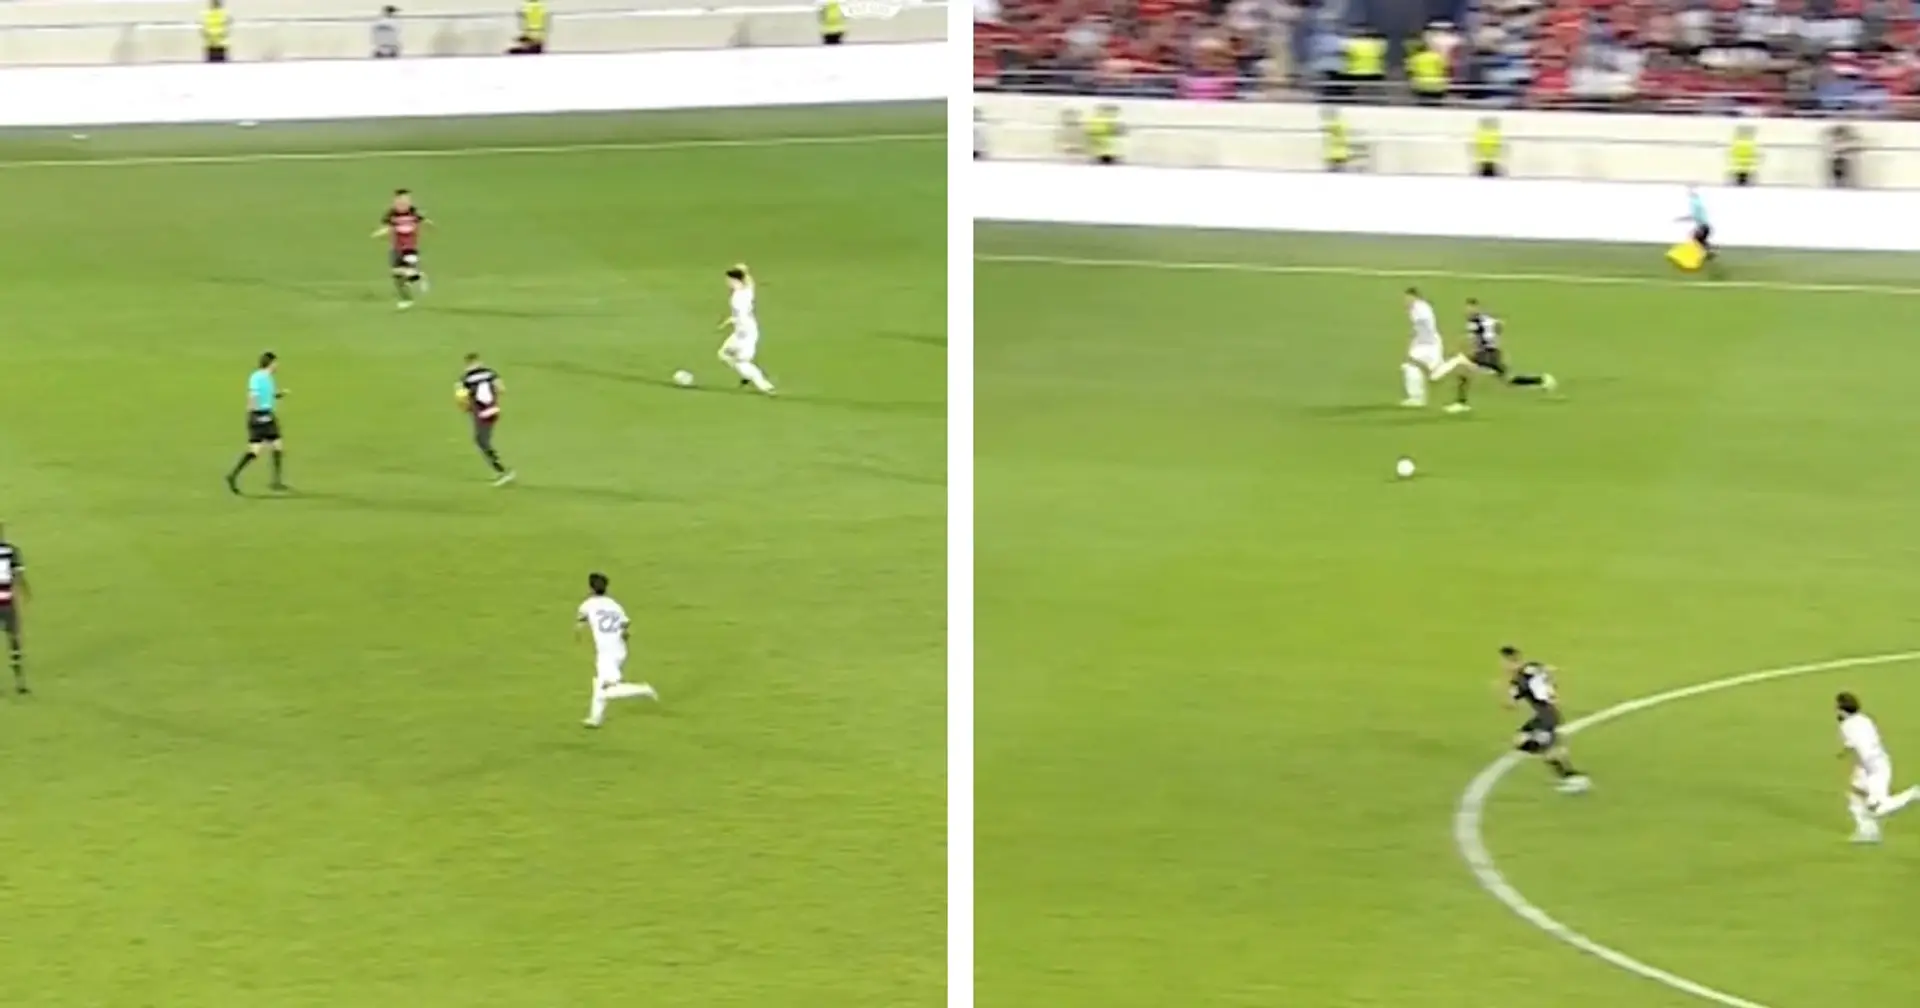 Bobby Clark plays inch-perfect pass for Darwin's goal in AC Milan win (video)